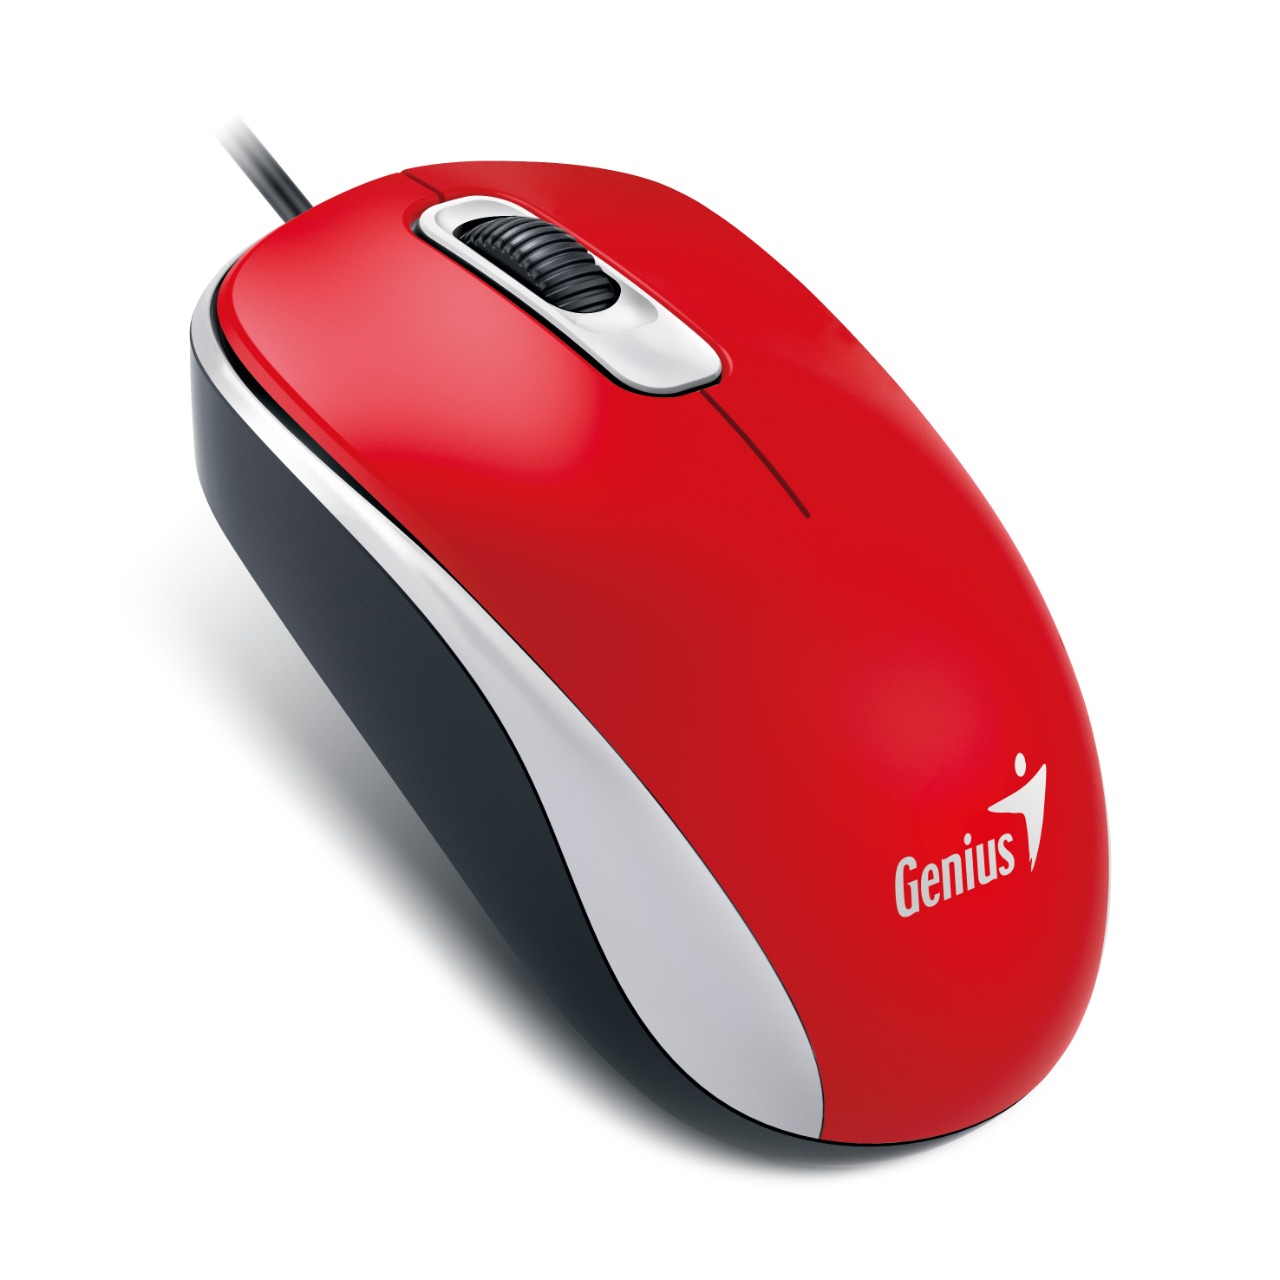 Wholesale mouse : dx-110 classic 3 button usb,1000 dpi ,red, g5, with smart genius app